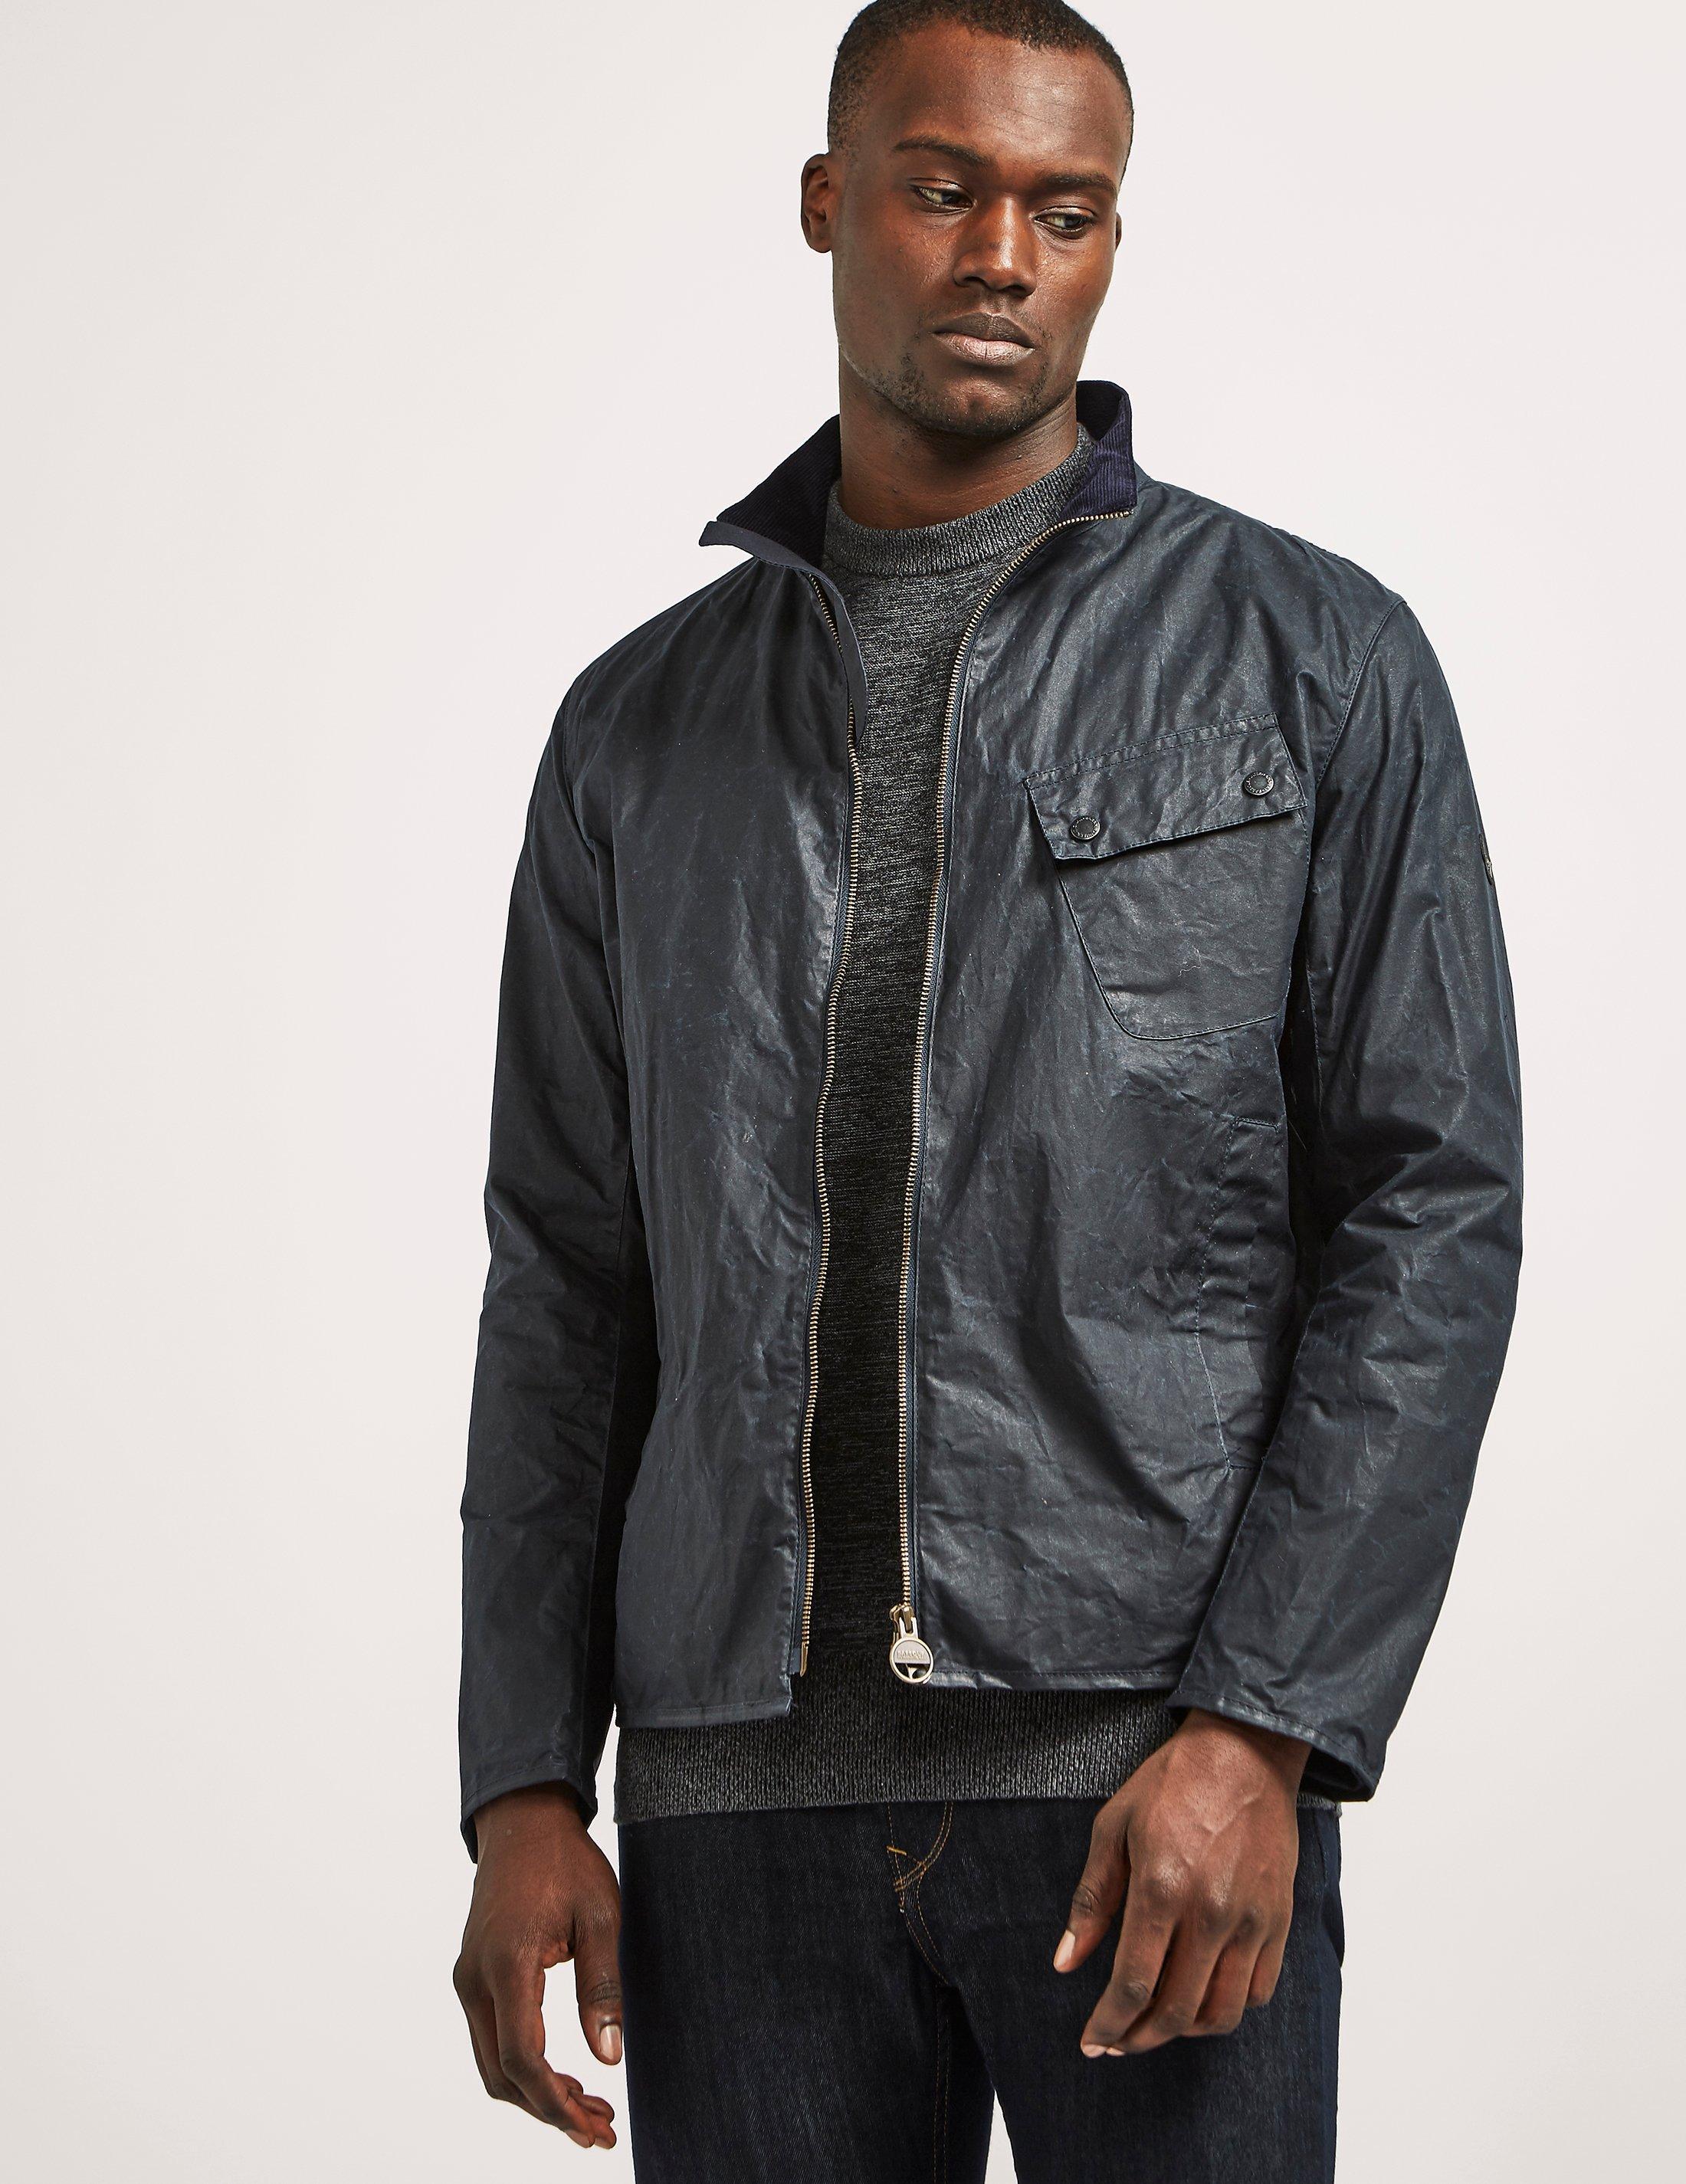 Barbour Aspect Dry Wax Jacket in Navy (Blue) for Men - Lyst